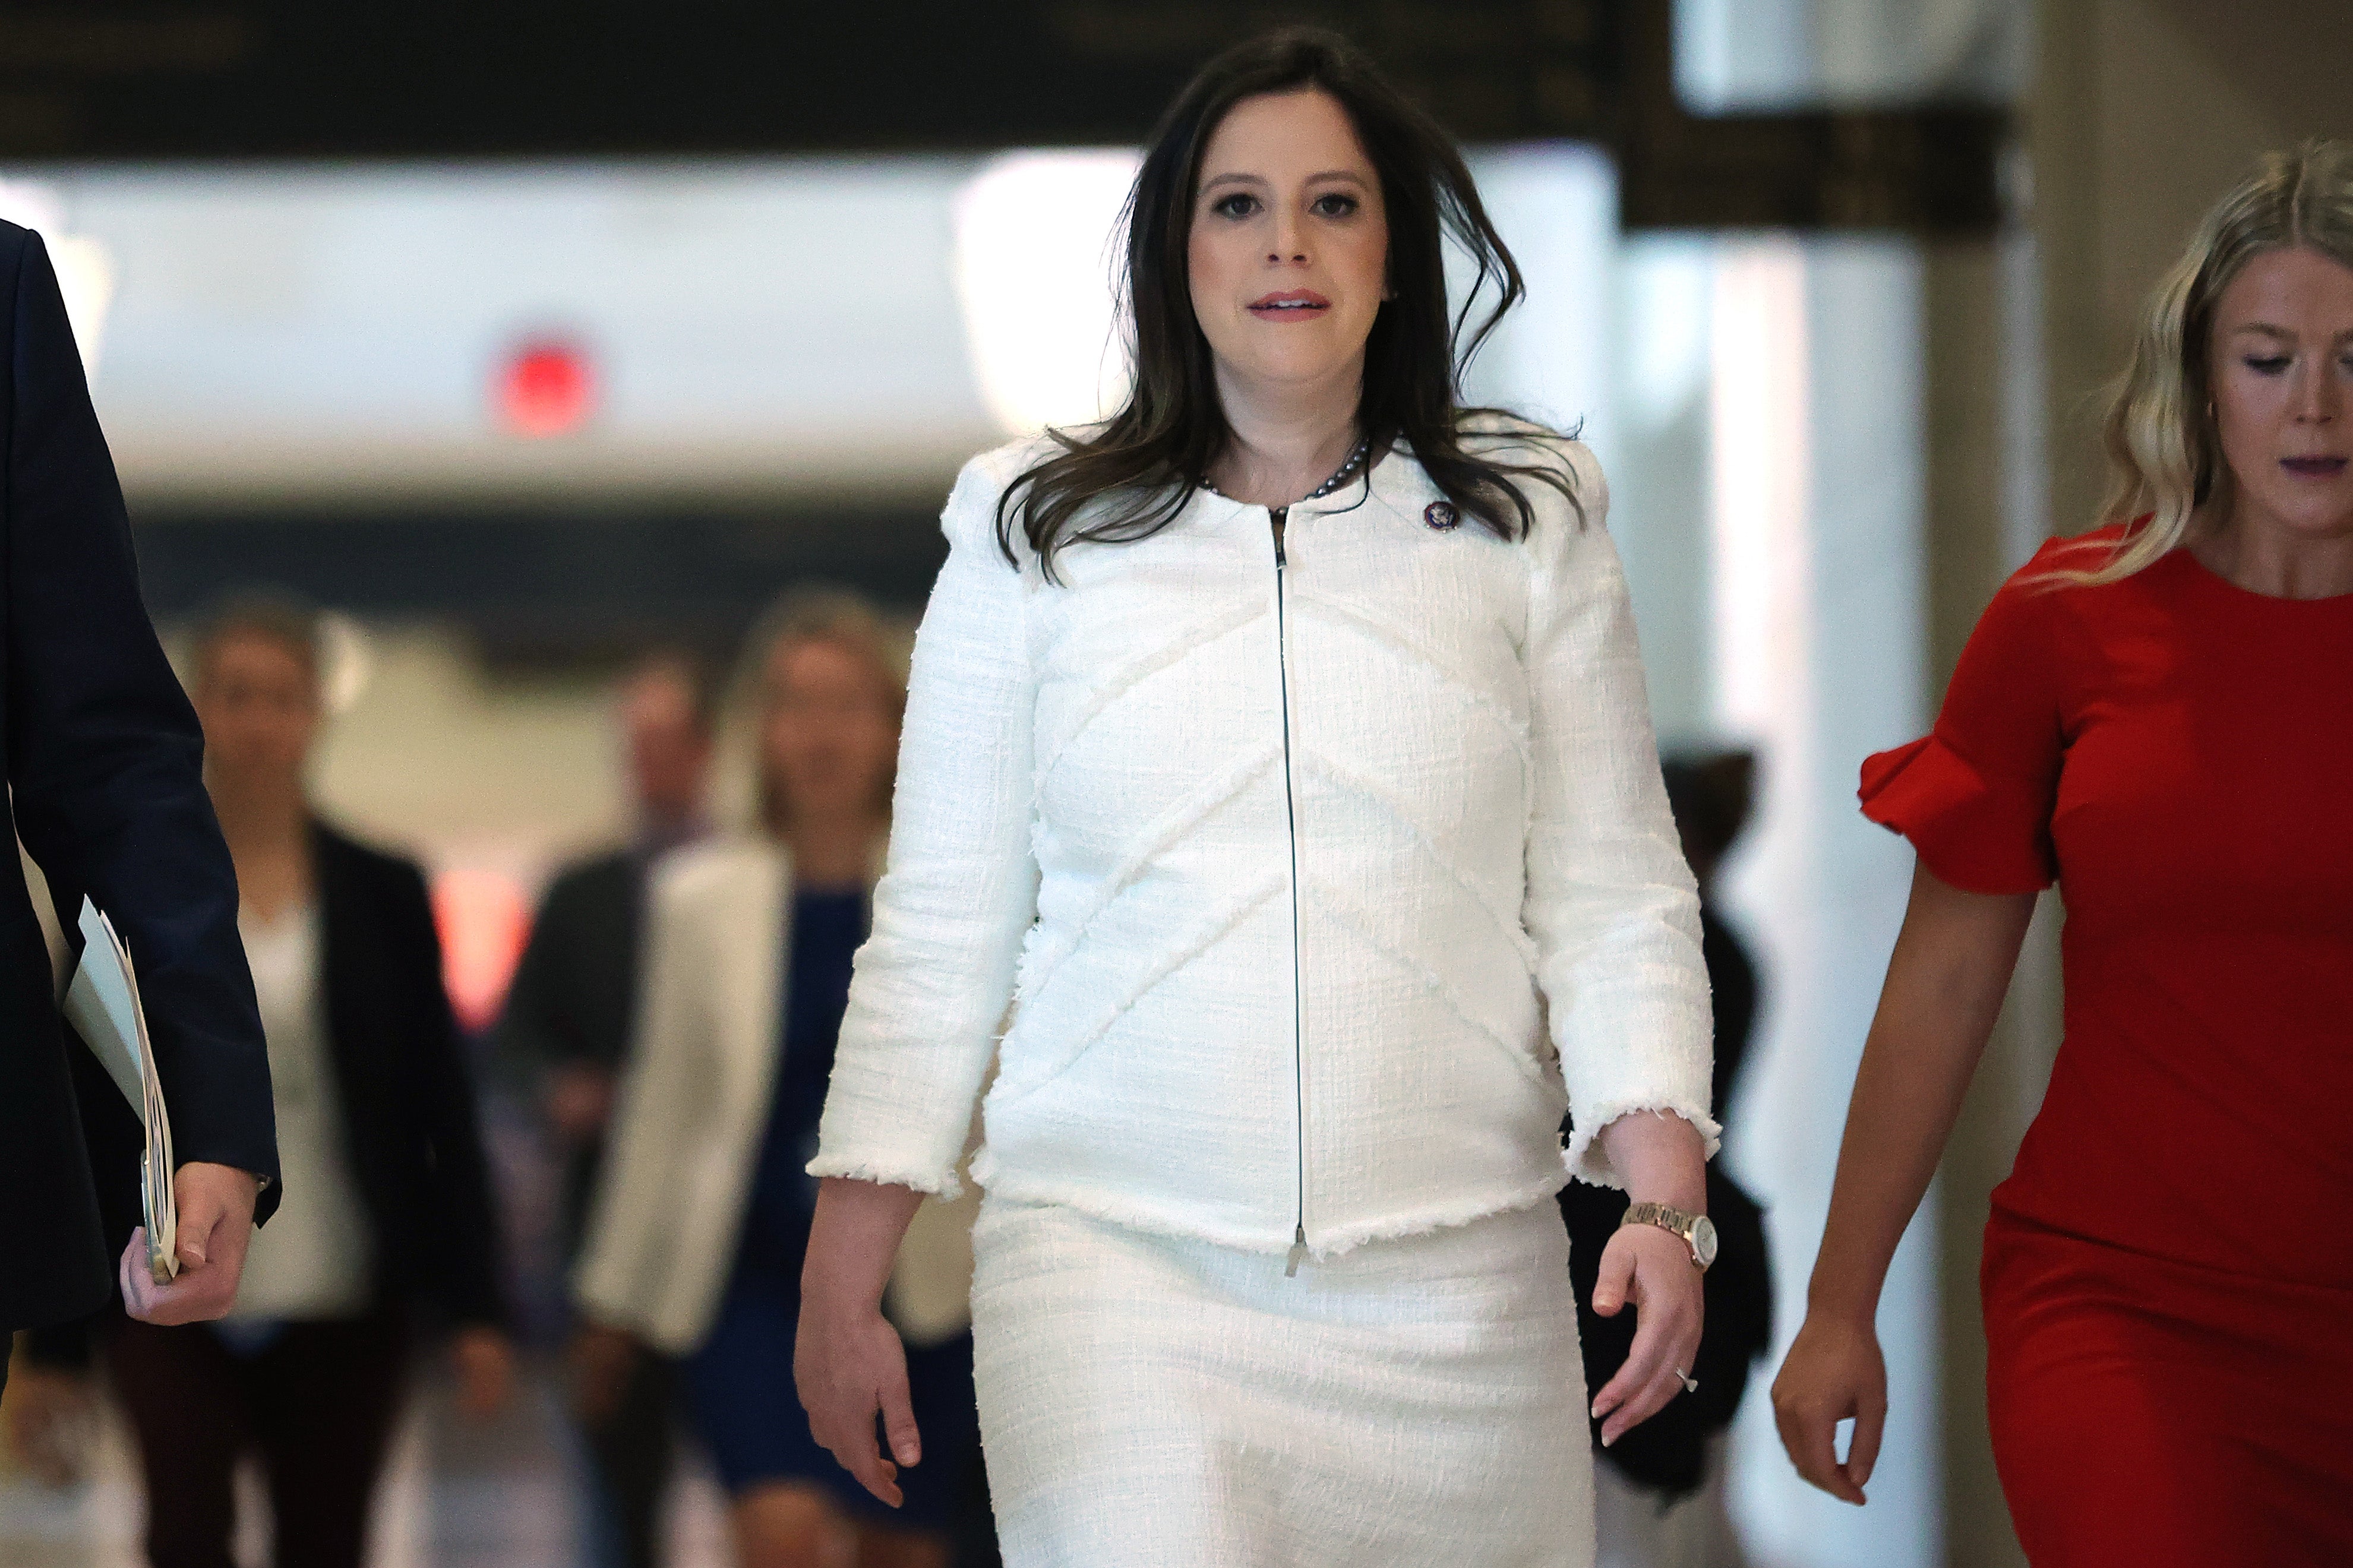 Elise Stefanik leaves a meeting where she was elected House Republican conference chair